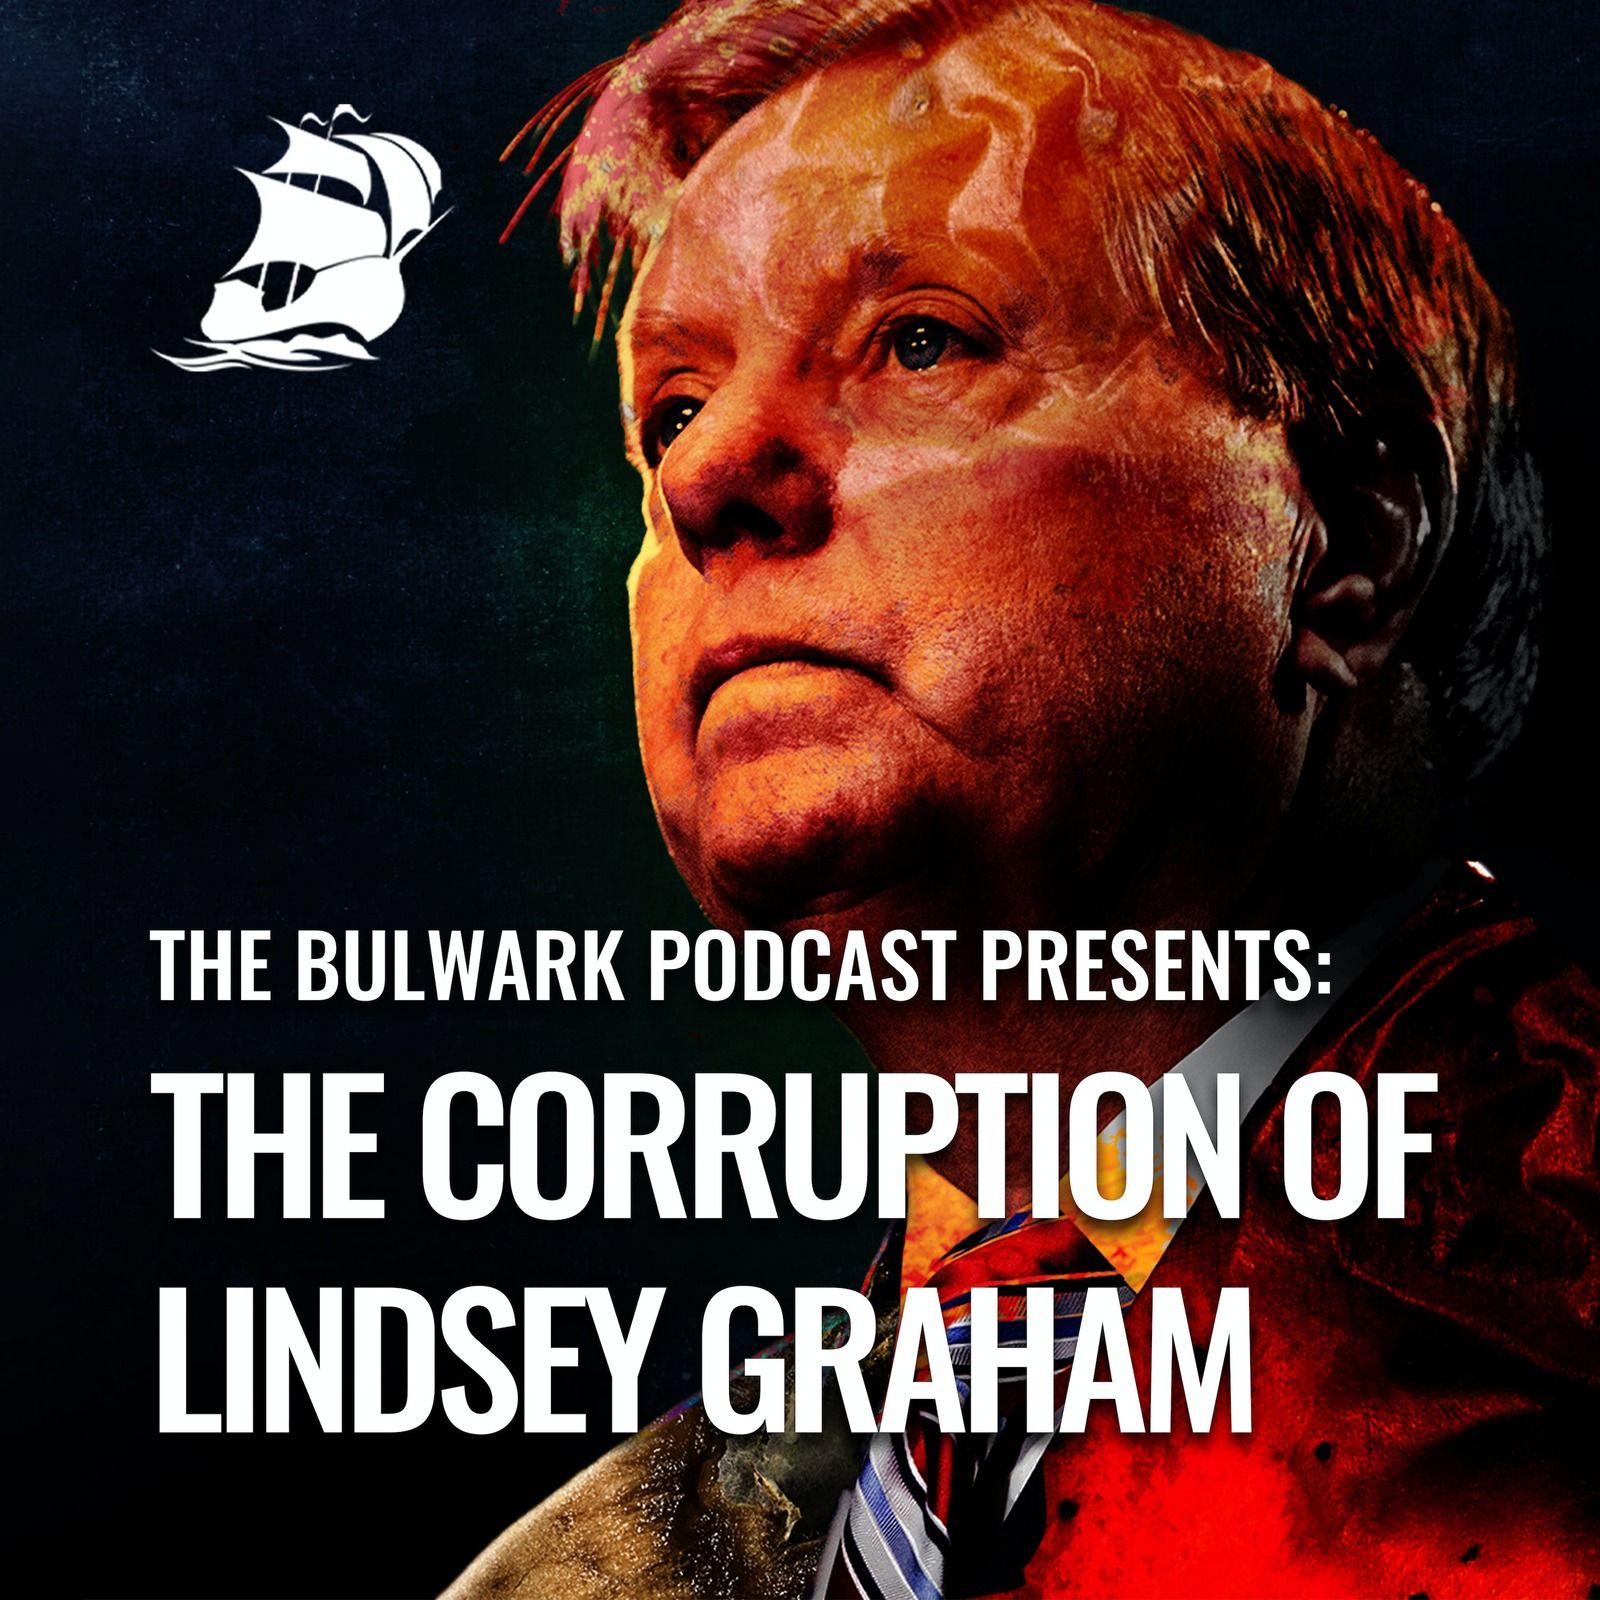 TRAILER The Bulwark Podcast Presents: The Corruption of Lindsey Graham by The Bulwark Podcast